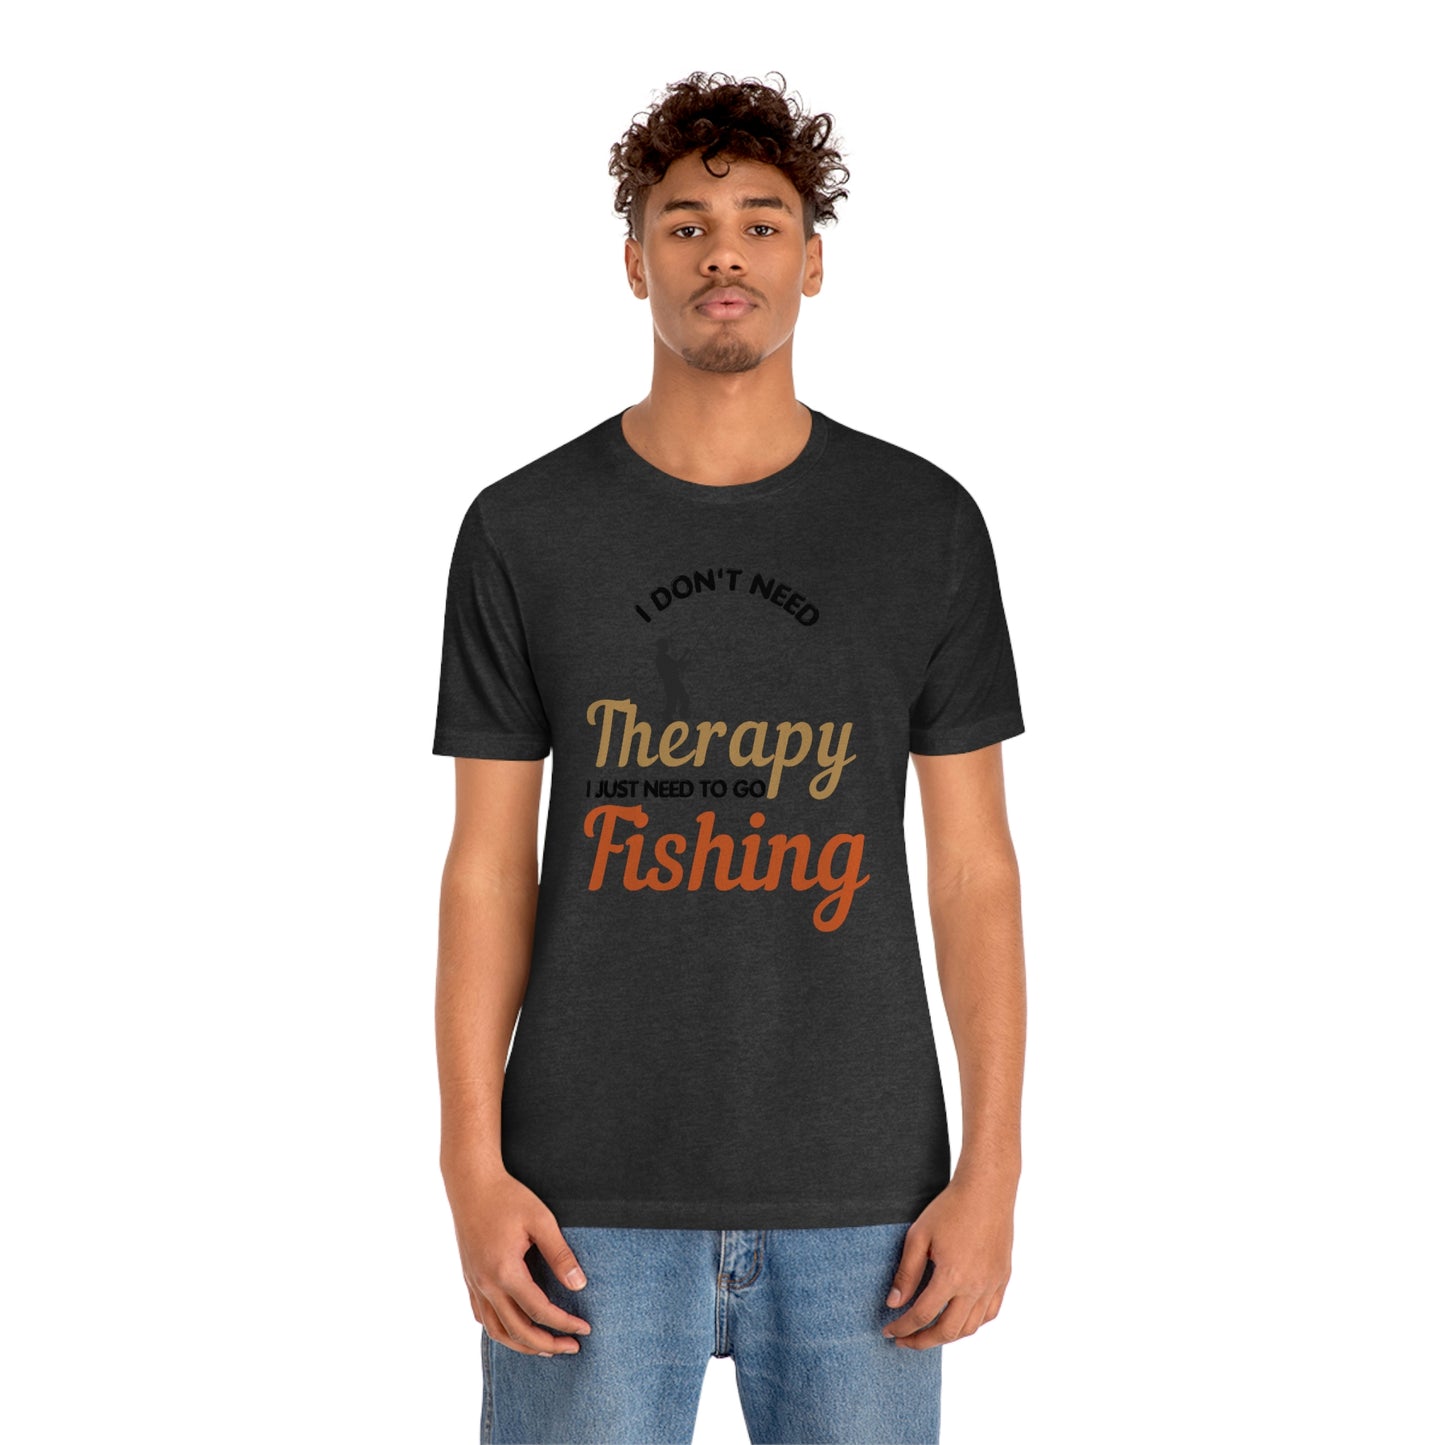 I don't need therapy I just need to go Fishing shirt, fishing shirt, dad shirt, father's day shirt, gift for Dad